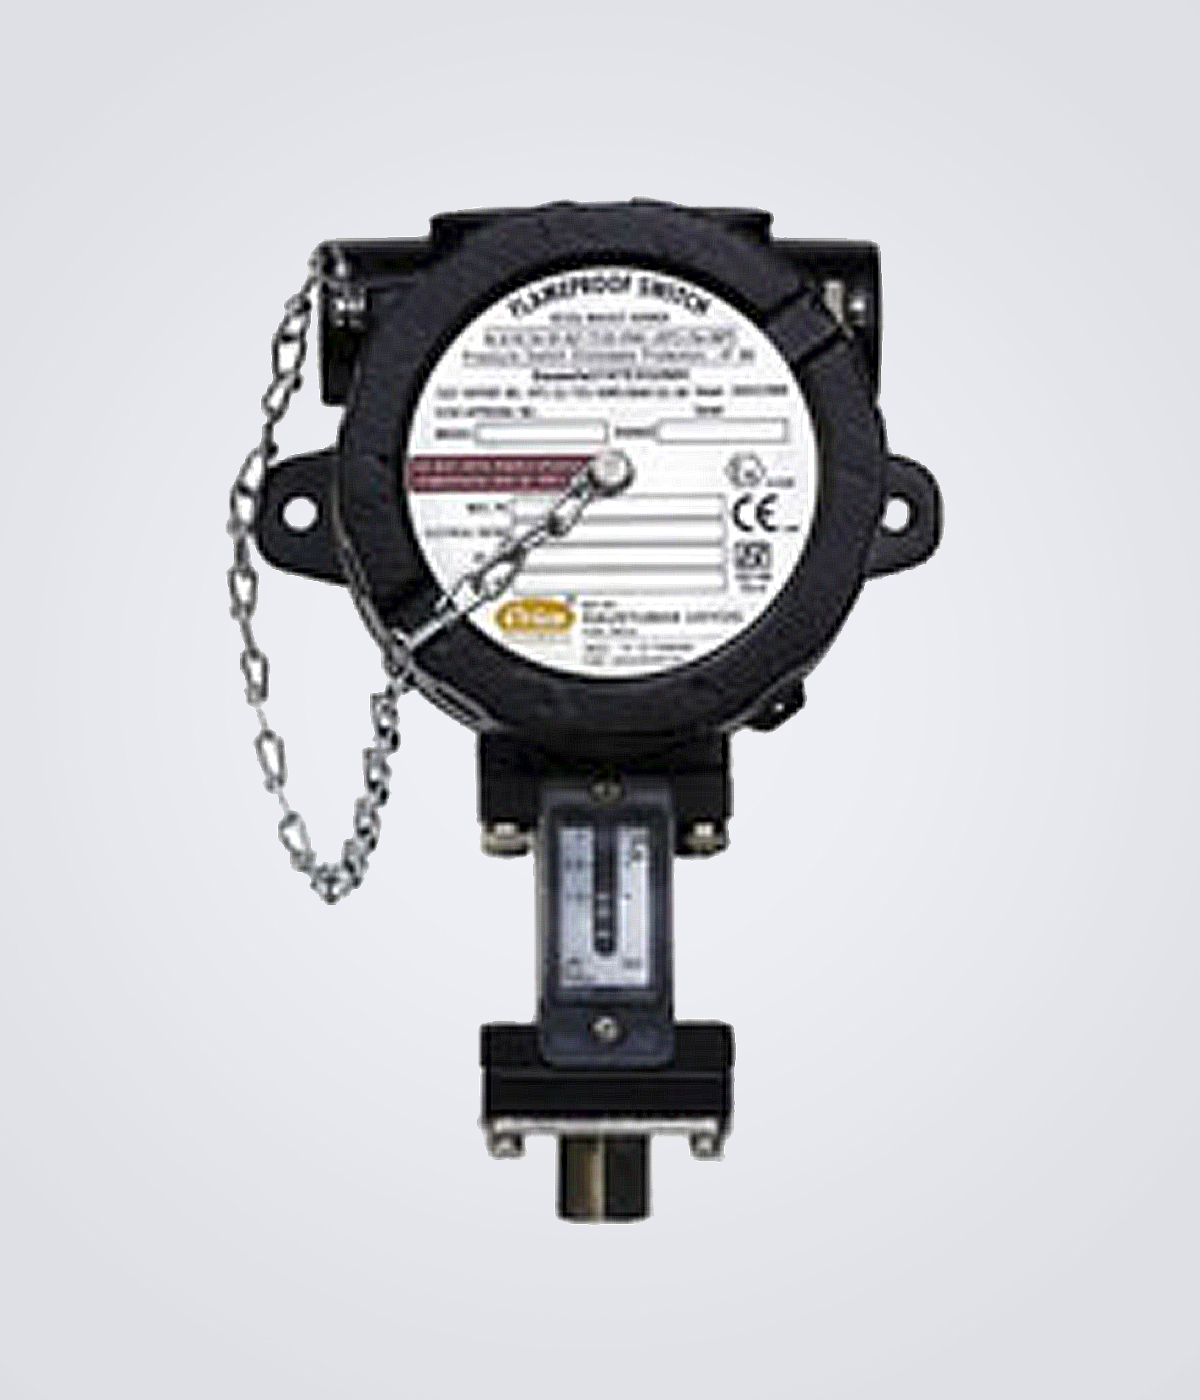 Flameproof High Range Pressure Switches with Scale FC series